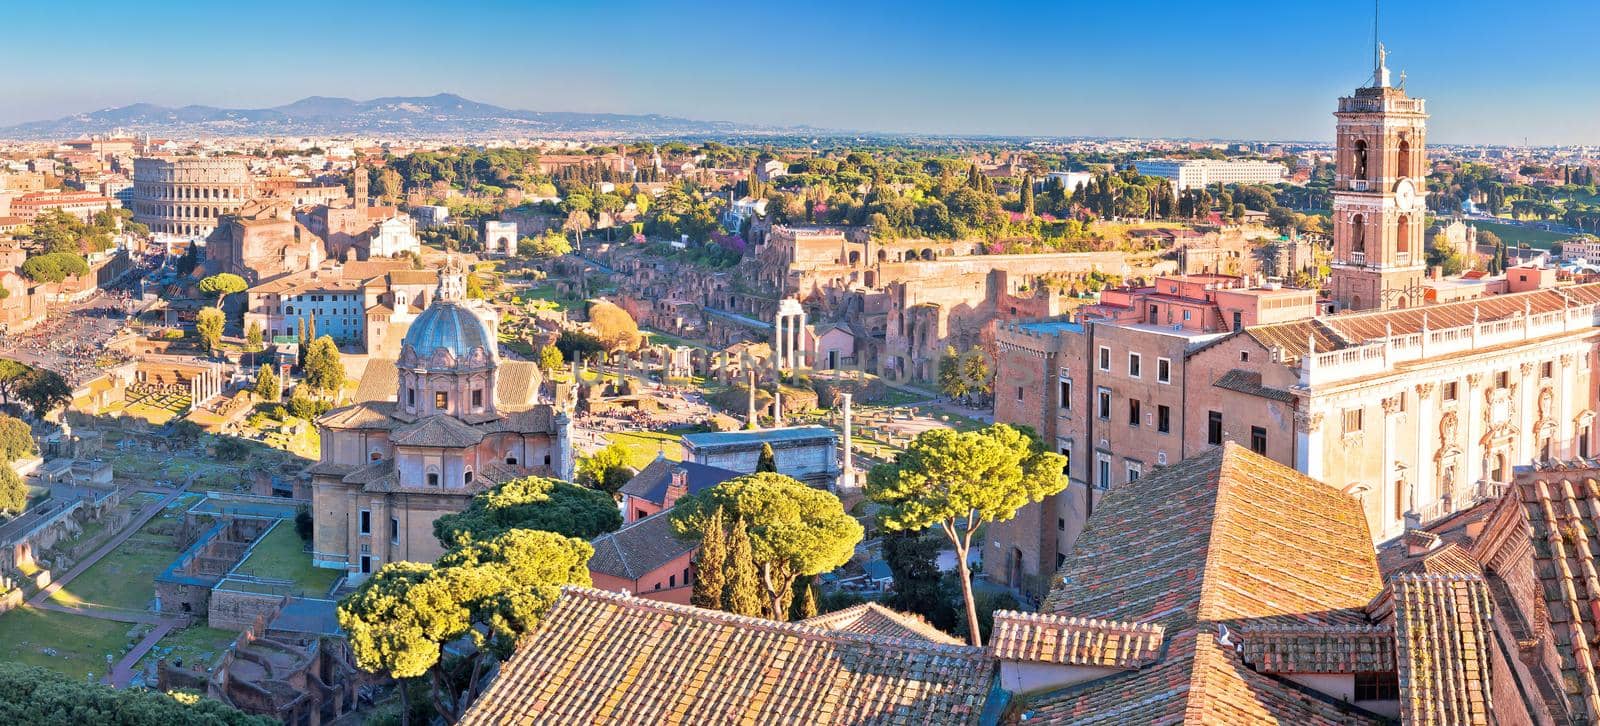 Eternal city of Rome historic landmarks panoramic view, capital of Italy
